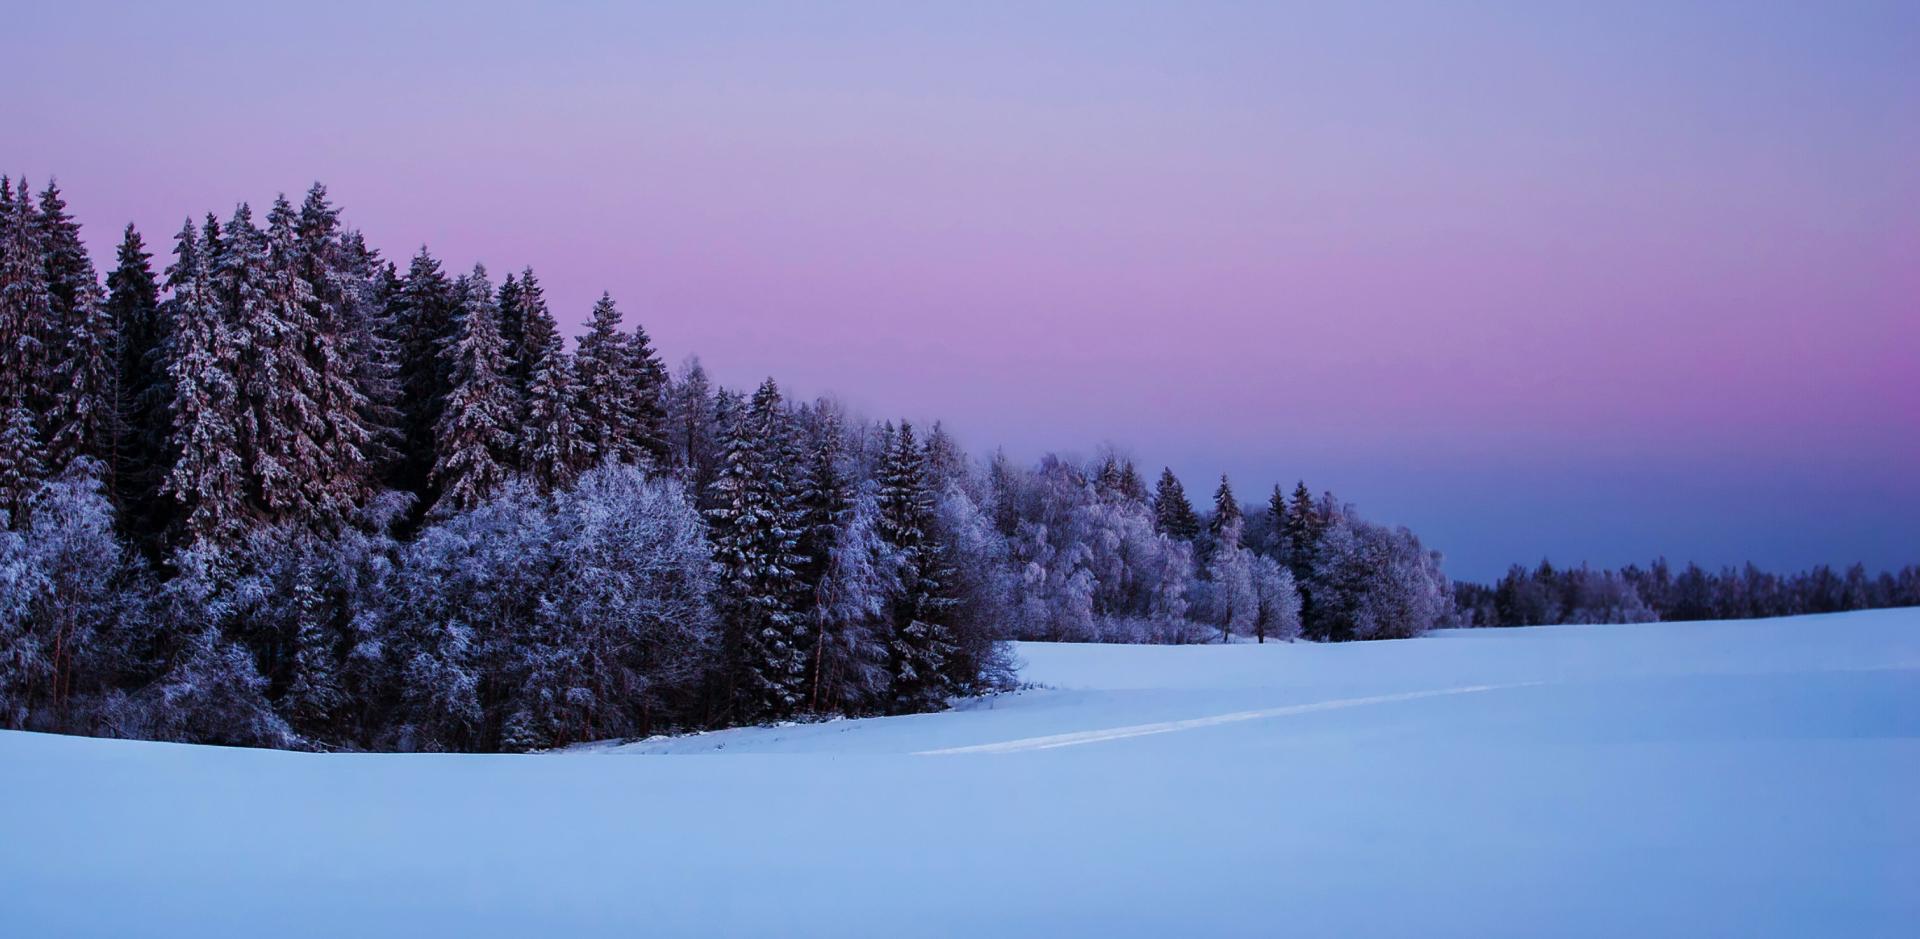 Snow covers the ground and trees, representing current snow conditions in the West. Image credit: gadag, Shutterstock.